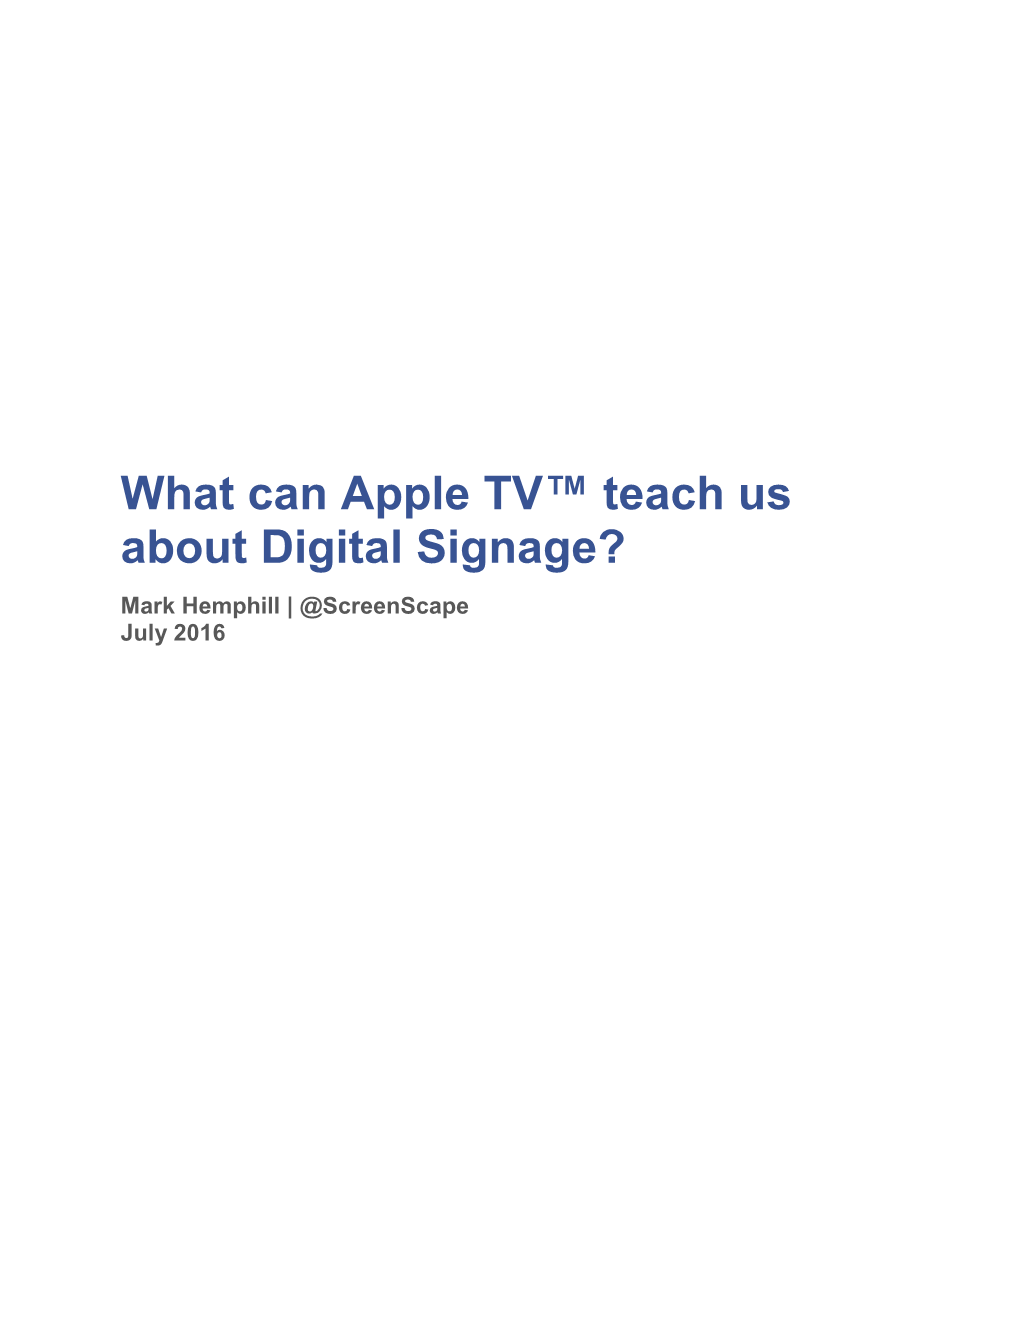 What Can Apple TV™ Teach Us About Digital Signage?